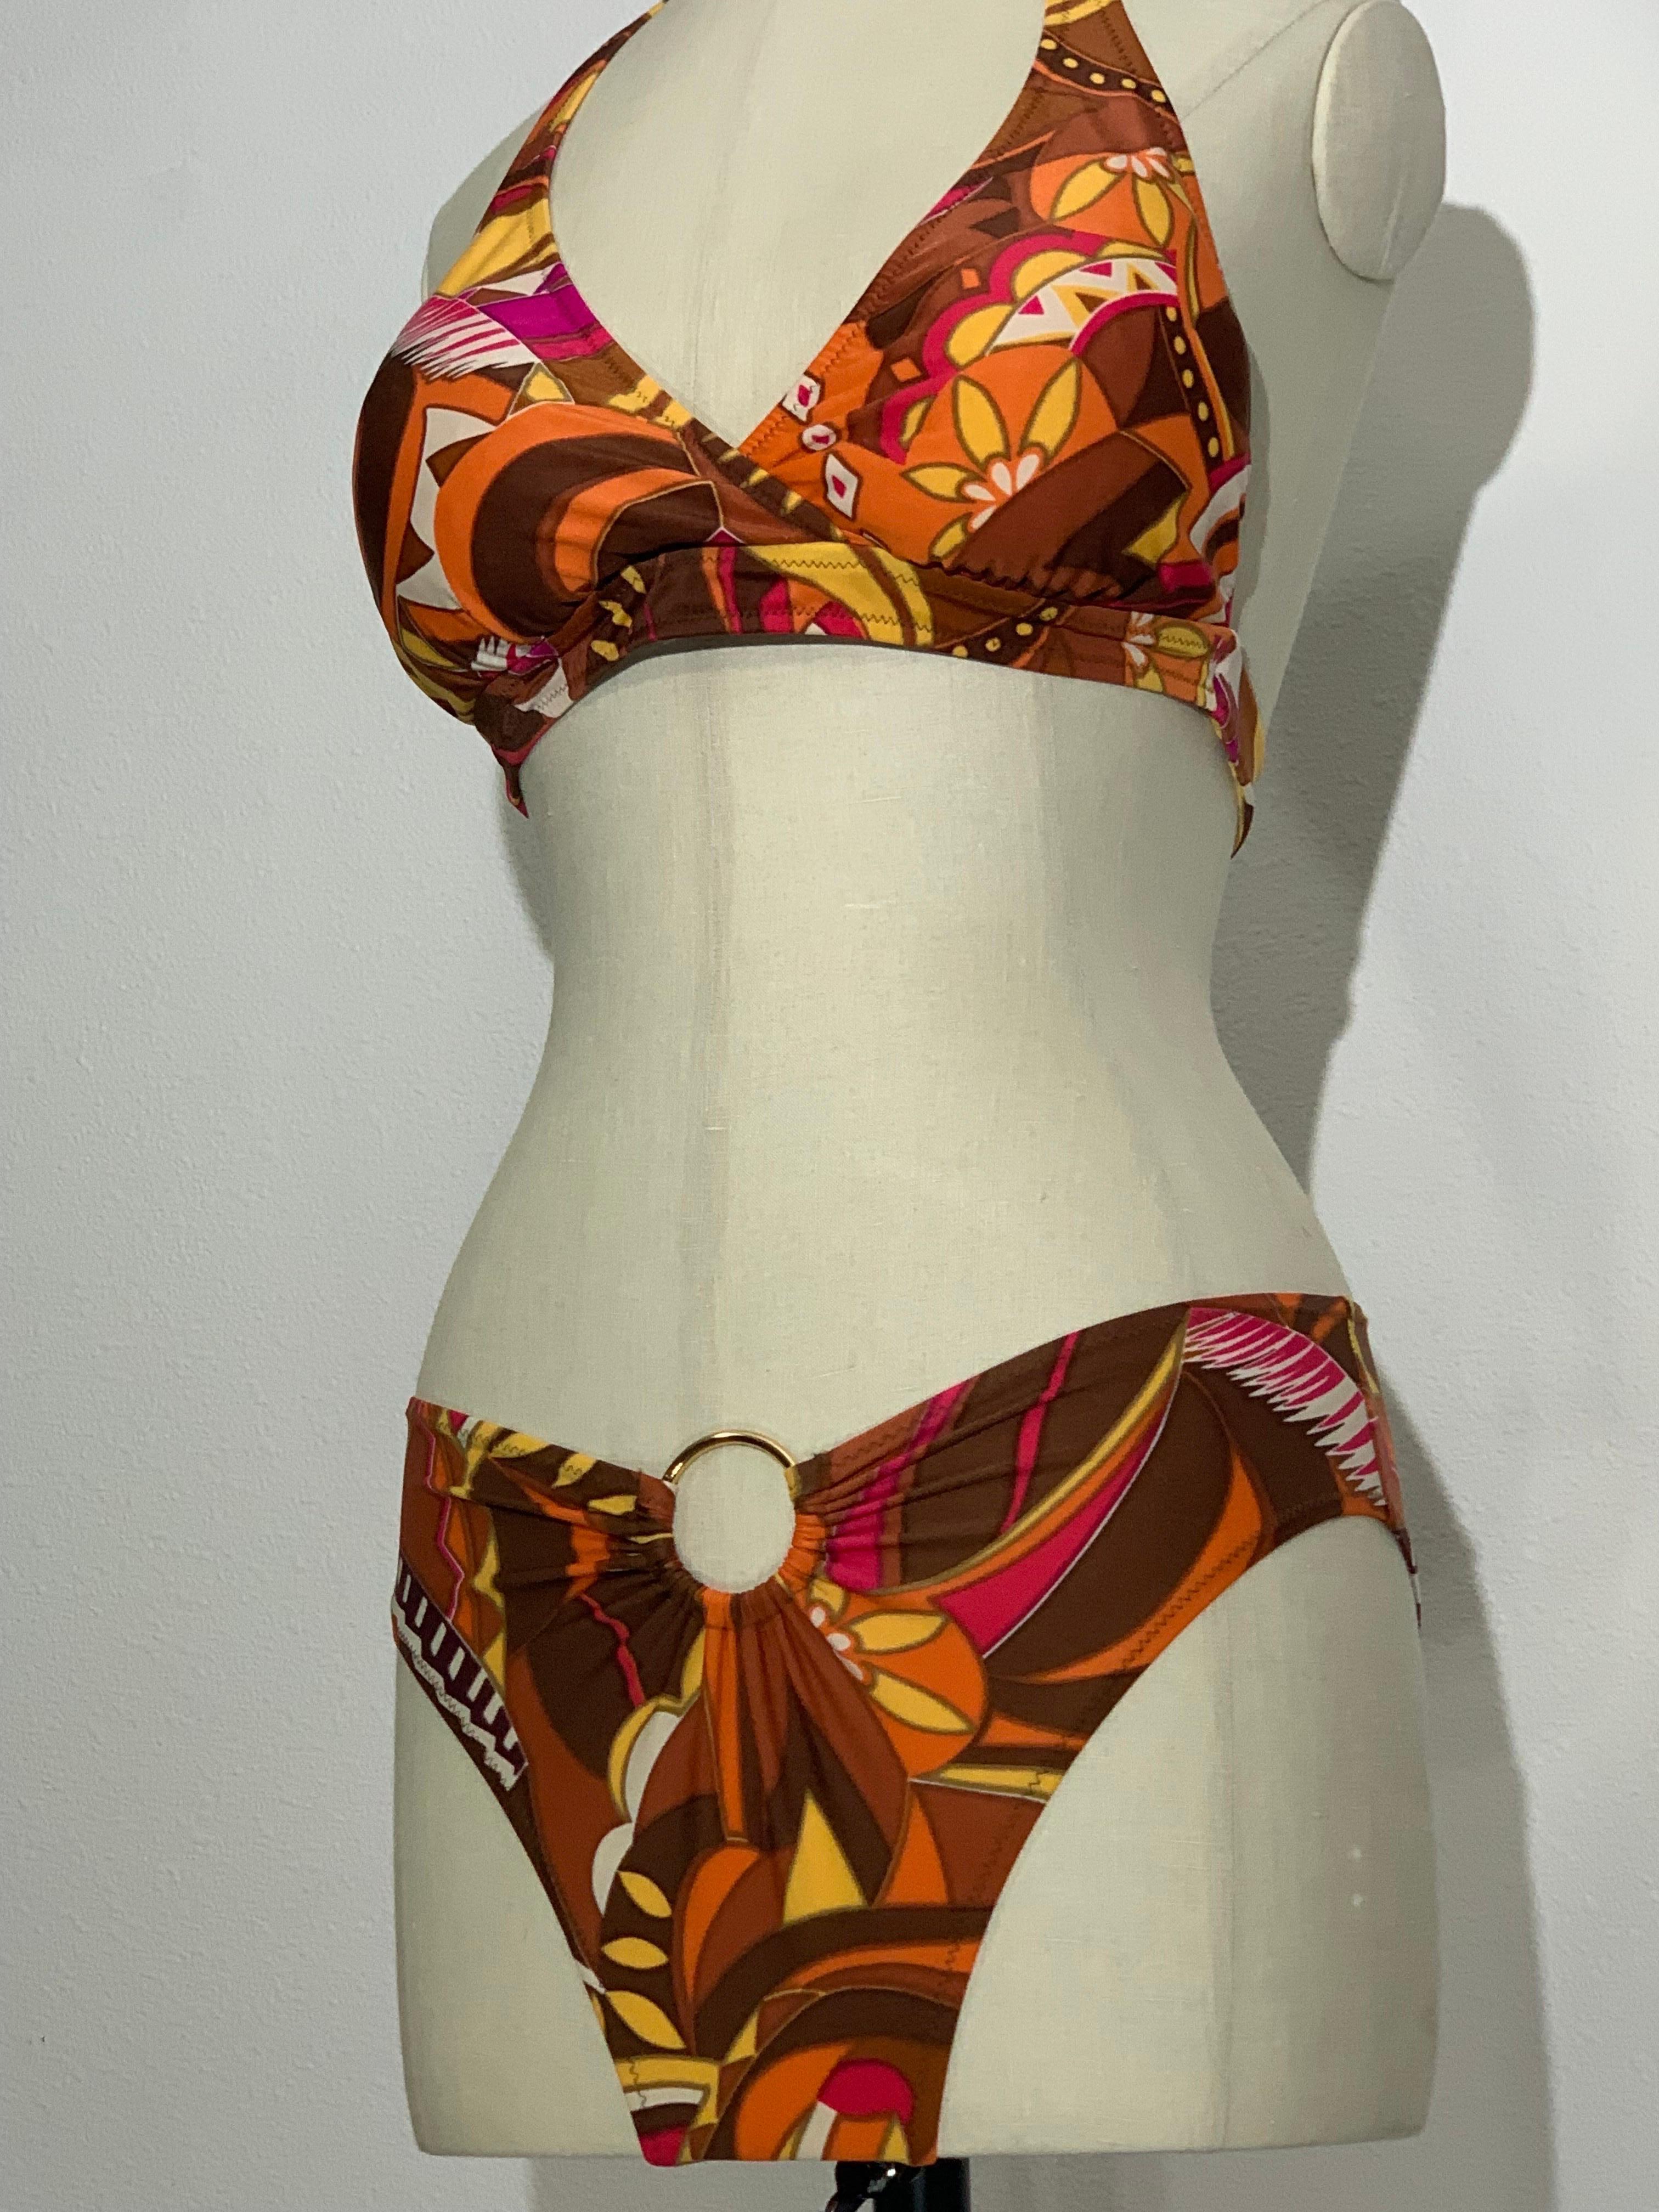 1970s Gottex Stylized Floral 2-Piece Bikini Swimsuit in Brown Copper and Orange For Sale 1